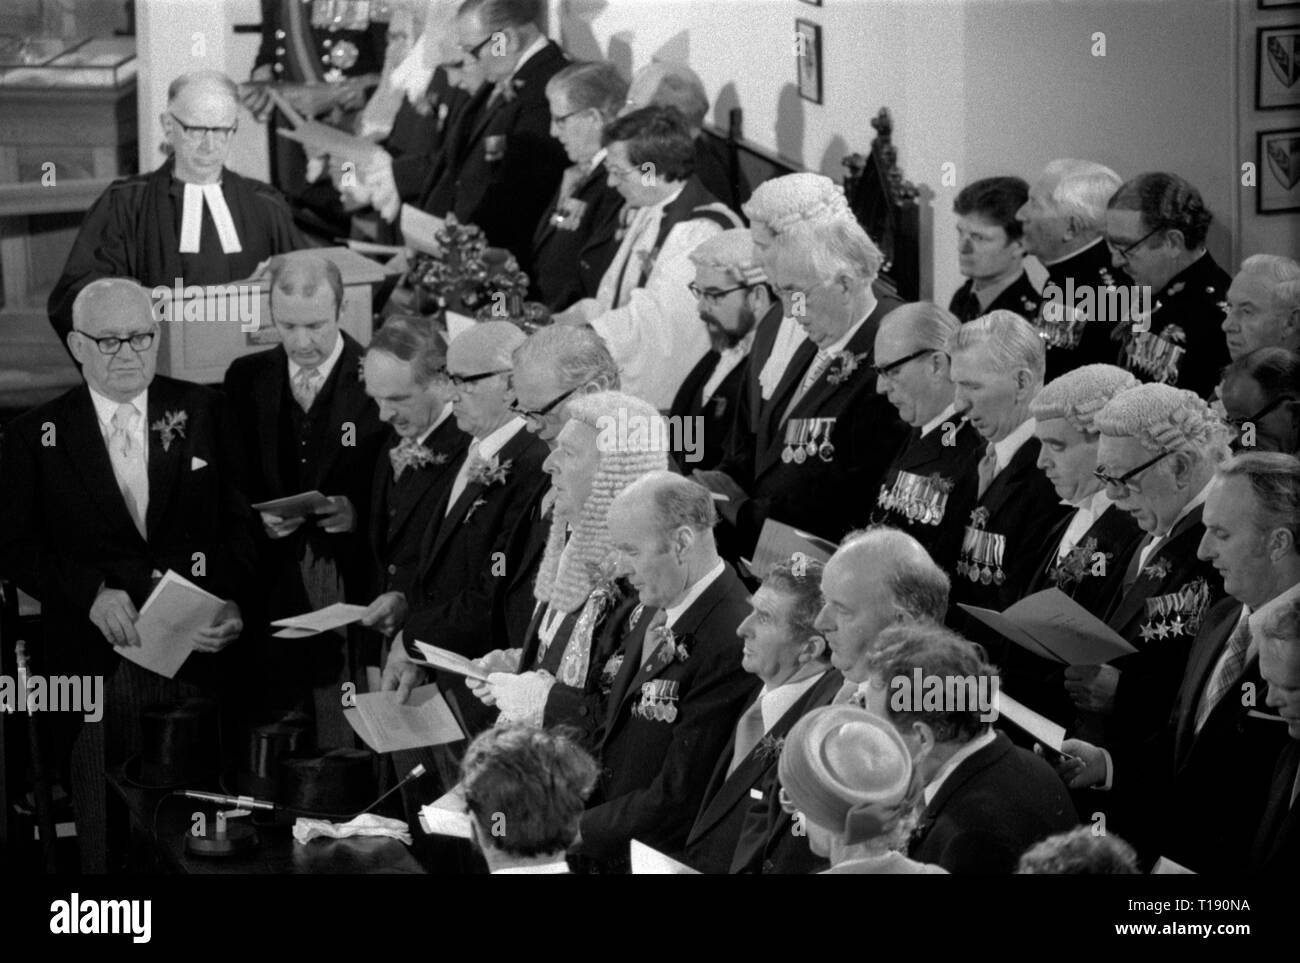 Isle of Man 1970s. The House of Keys Tynwald is the Manx Parliament. Tynwald Day is the National Day of the Isle of Man, usually observed on 5 July annually at St Johns. The Tynwald Court participates at the Tynwald Day Ceremony. 1978 HOMER SYKES Stock Photo